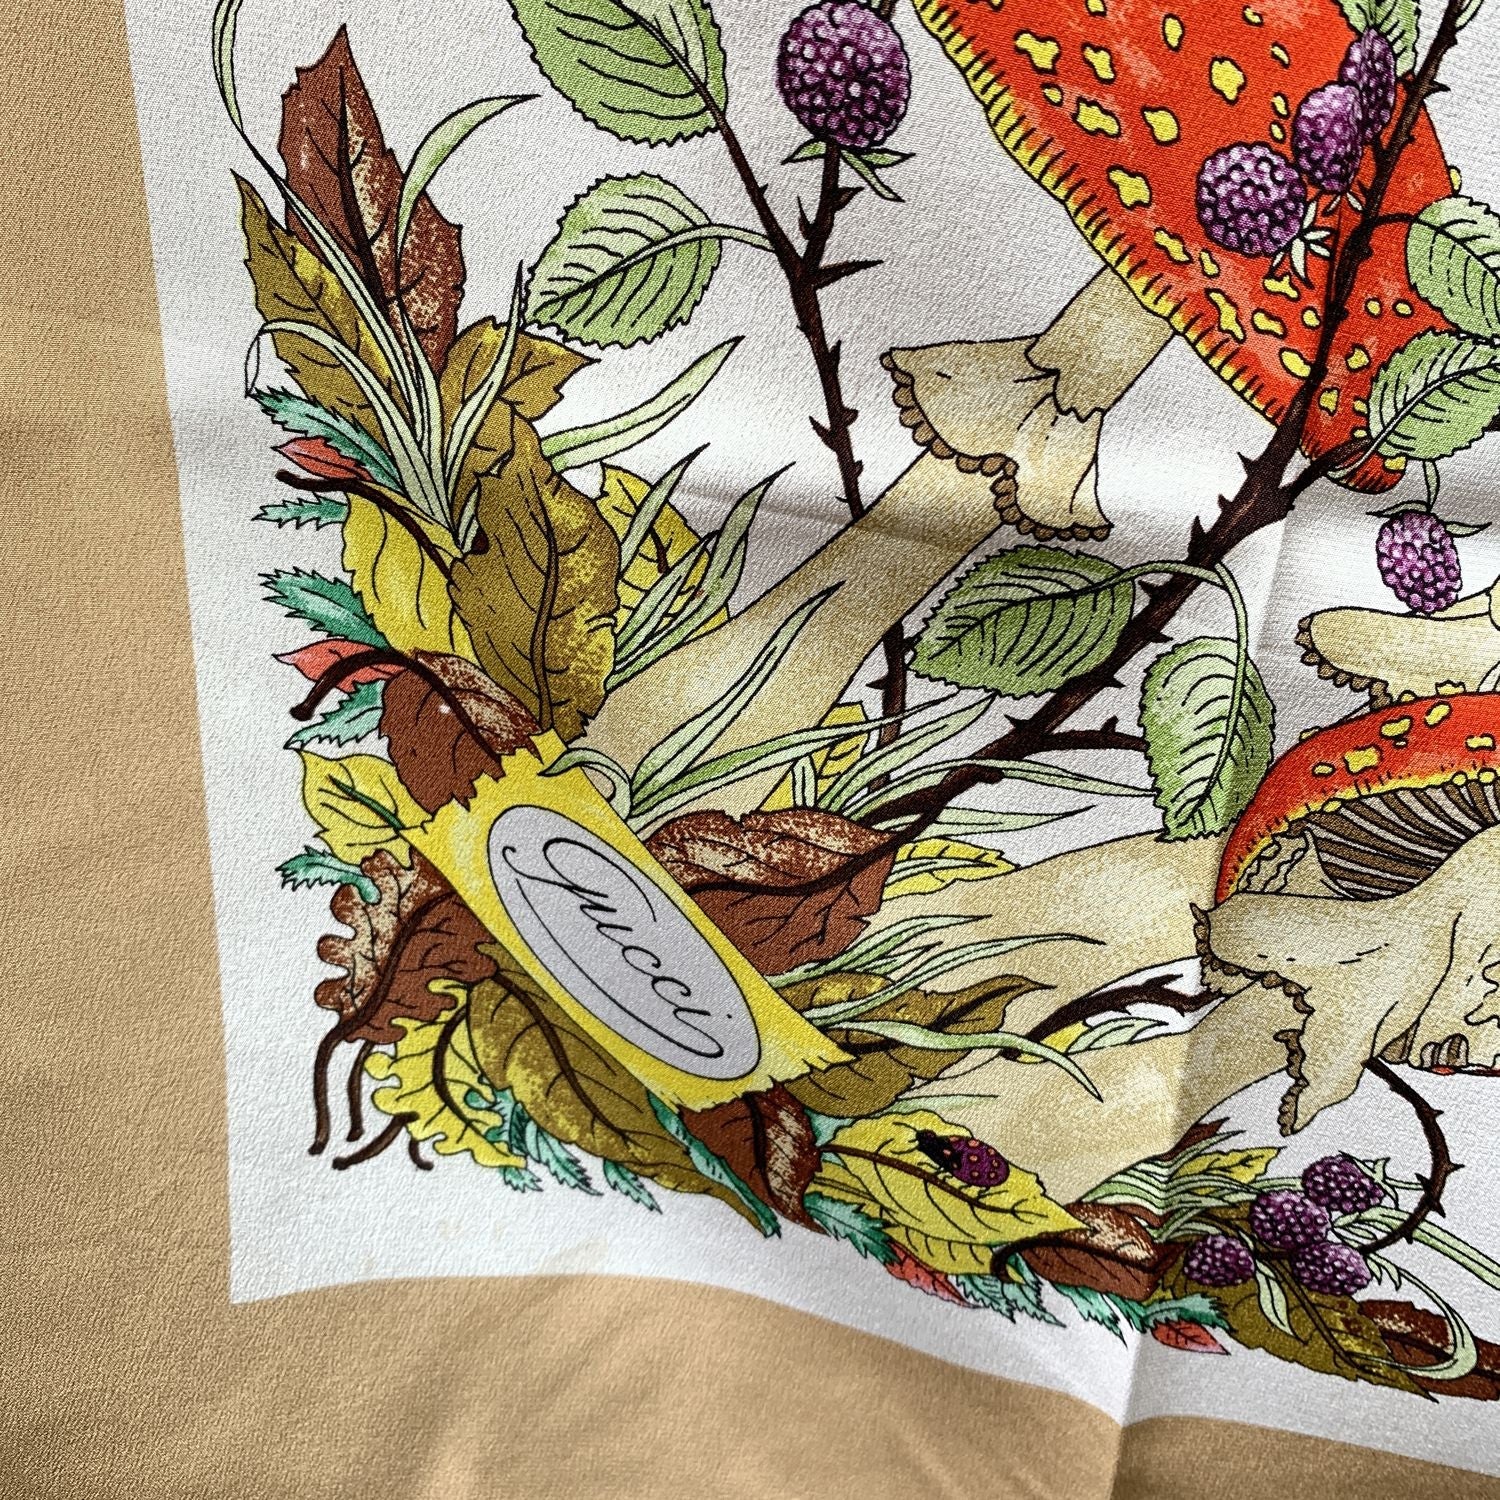 GUCCI Scarves Funghi (Mushrooms)